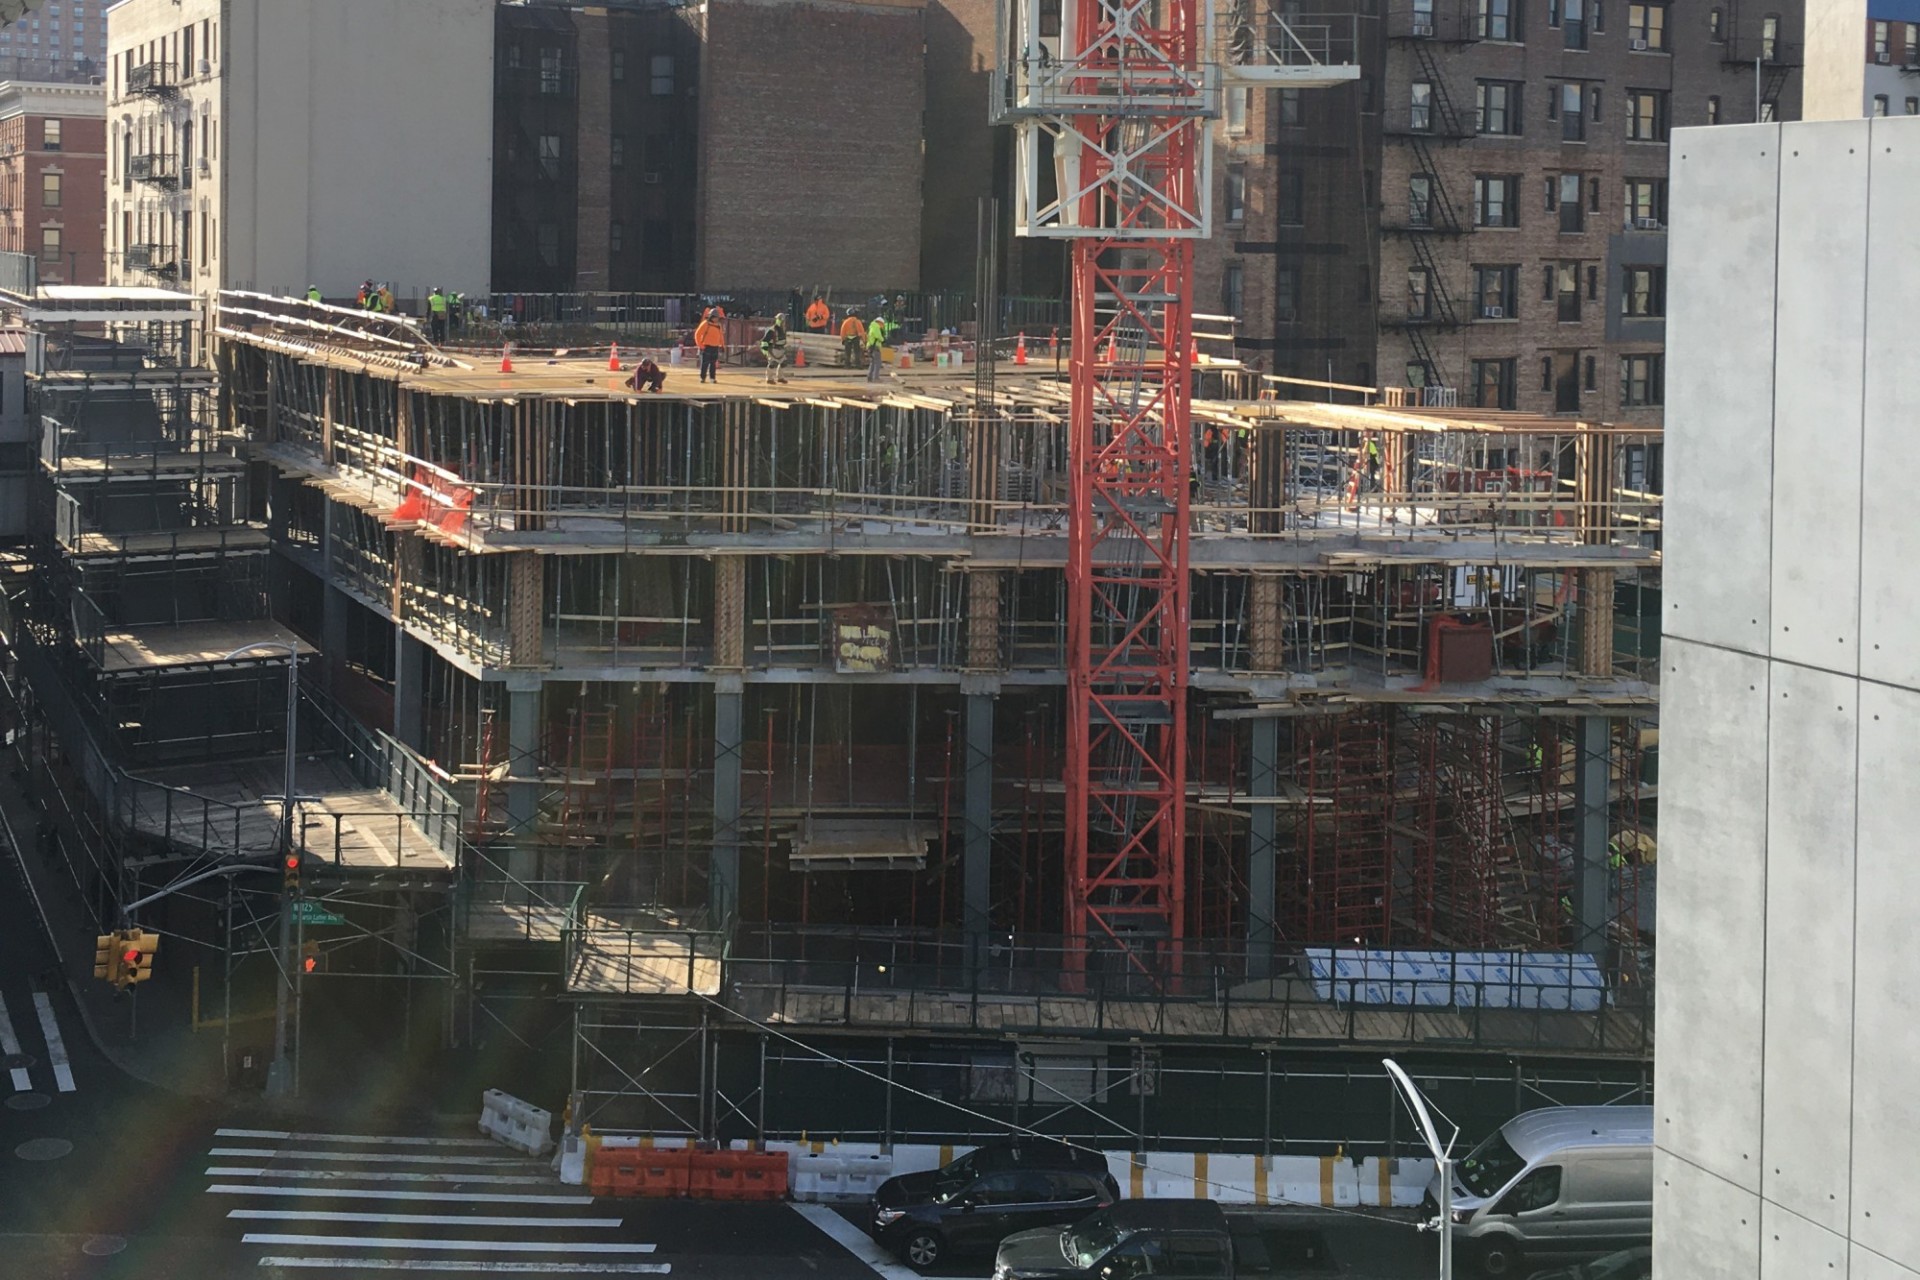 An aerial view of the 600 W. 125th Street construction site from the 125th Street subway.